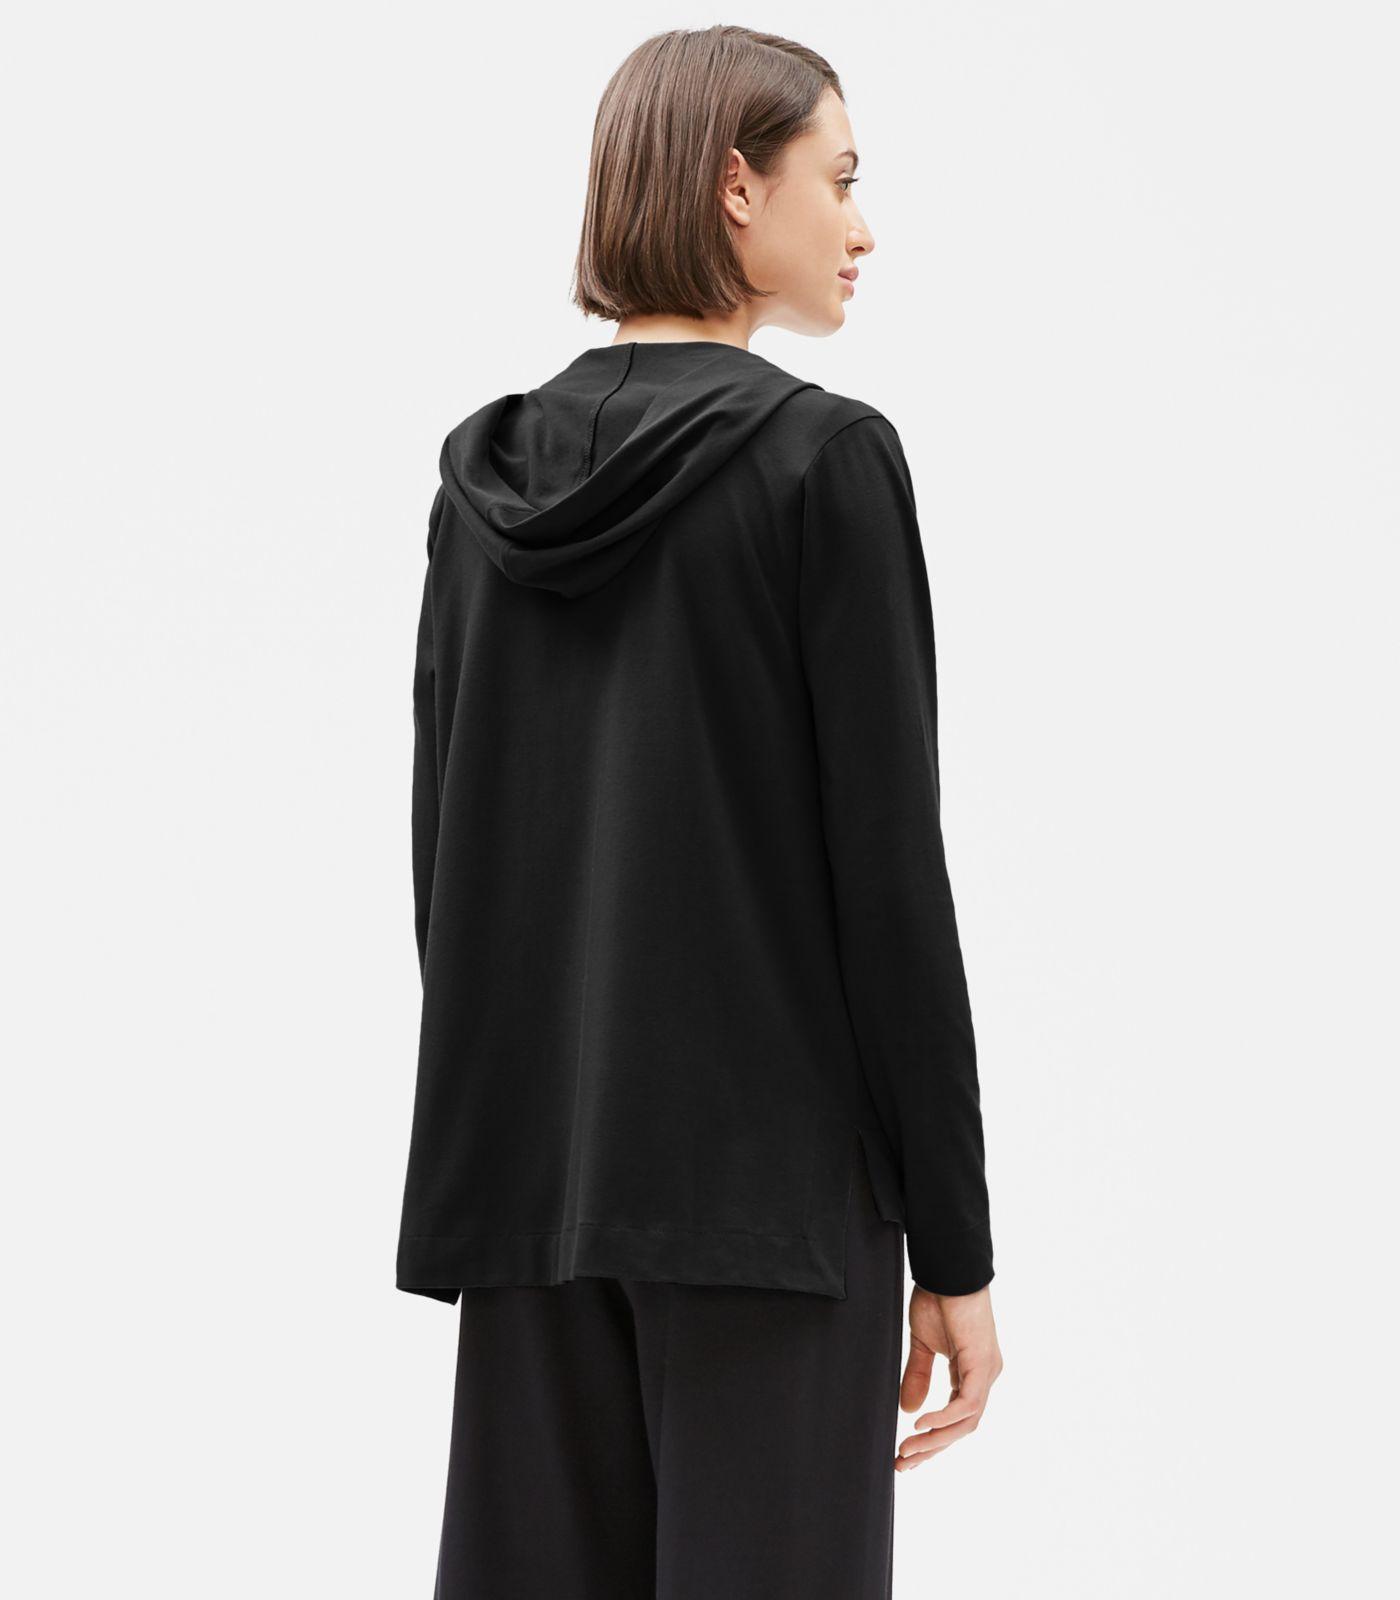 Lyst - Eileen Fisher Cotton Stretch Jersey Hooded Cardigan in Black